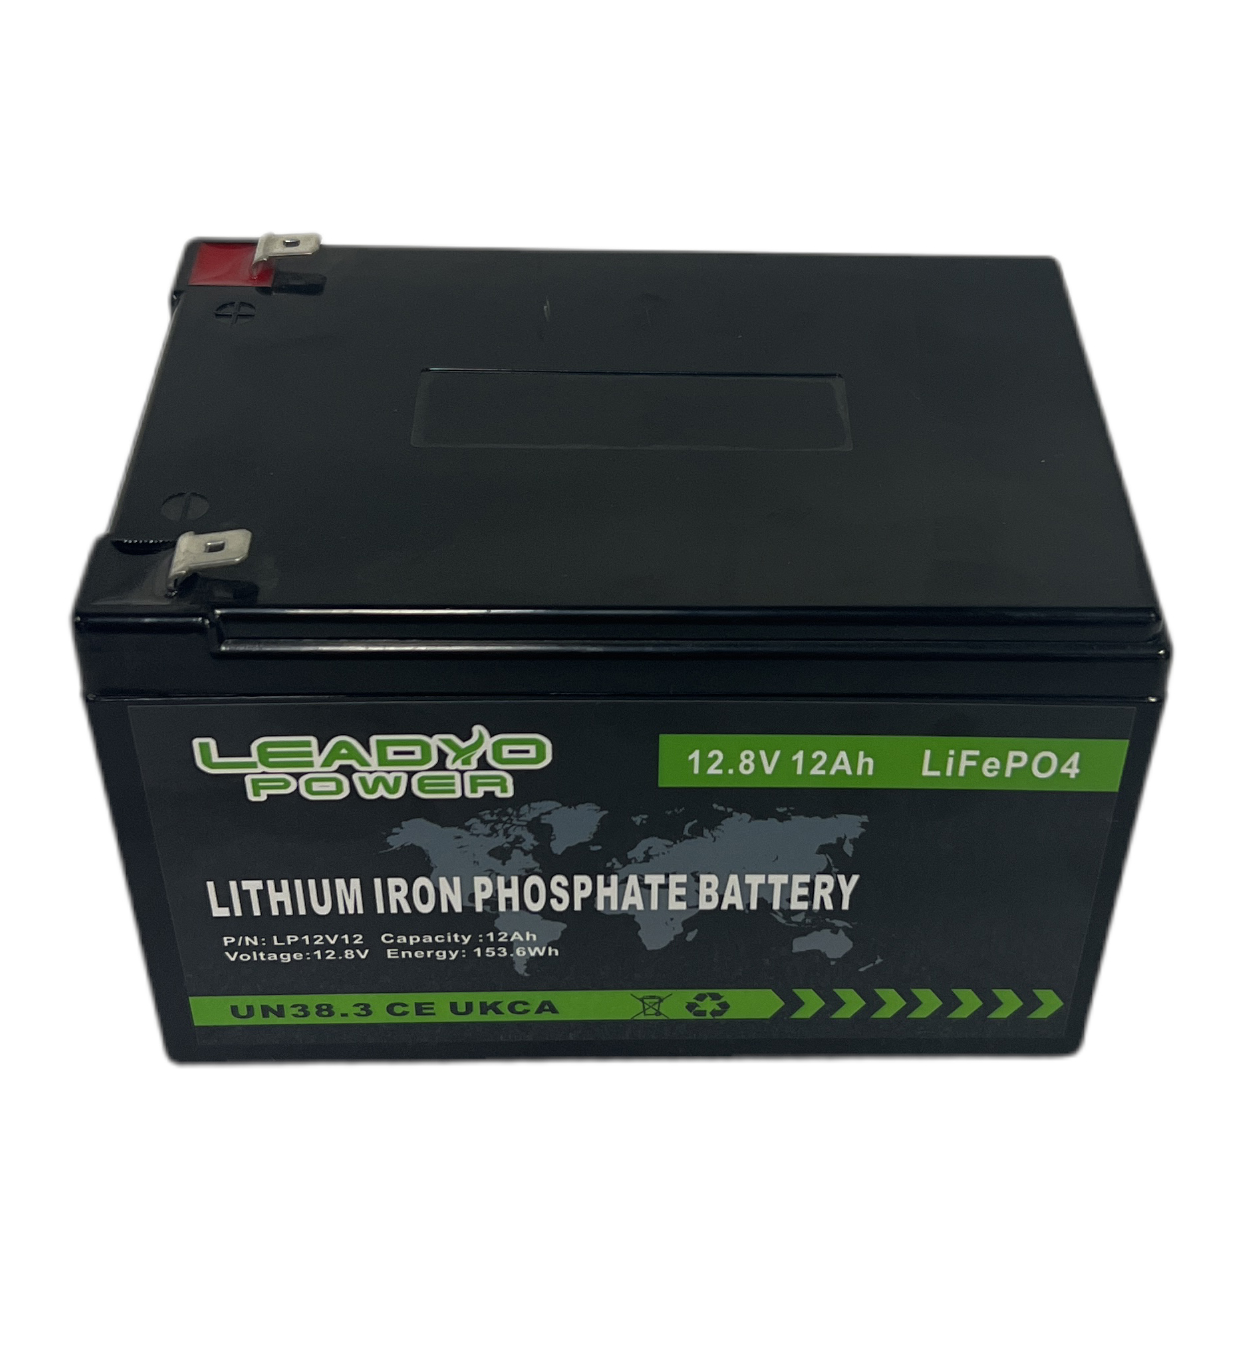 Leadyo Power: Your Trusted Source for LiFePO4 Battery Technology